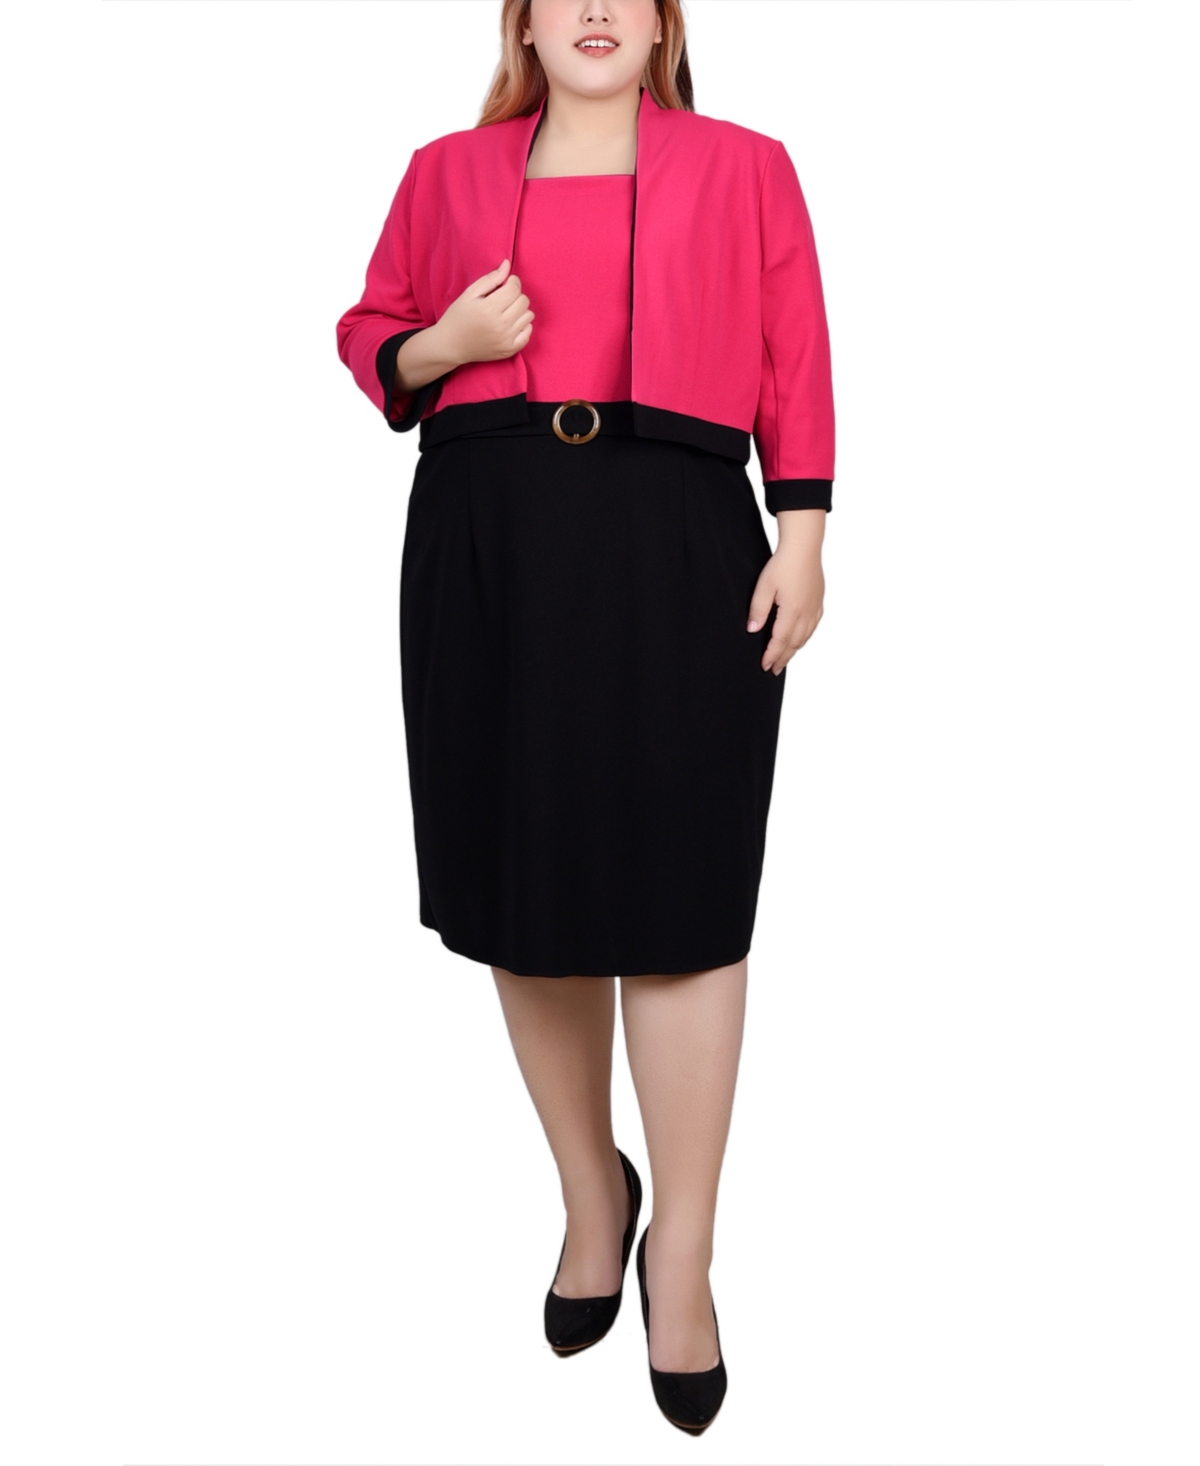 NY COLLECTION PLUS SIZE 3/4 SLEEVE COLORBLOCKED DRESS, 2 PIECE SET